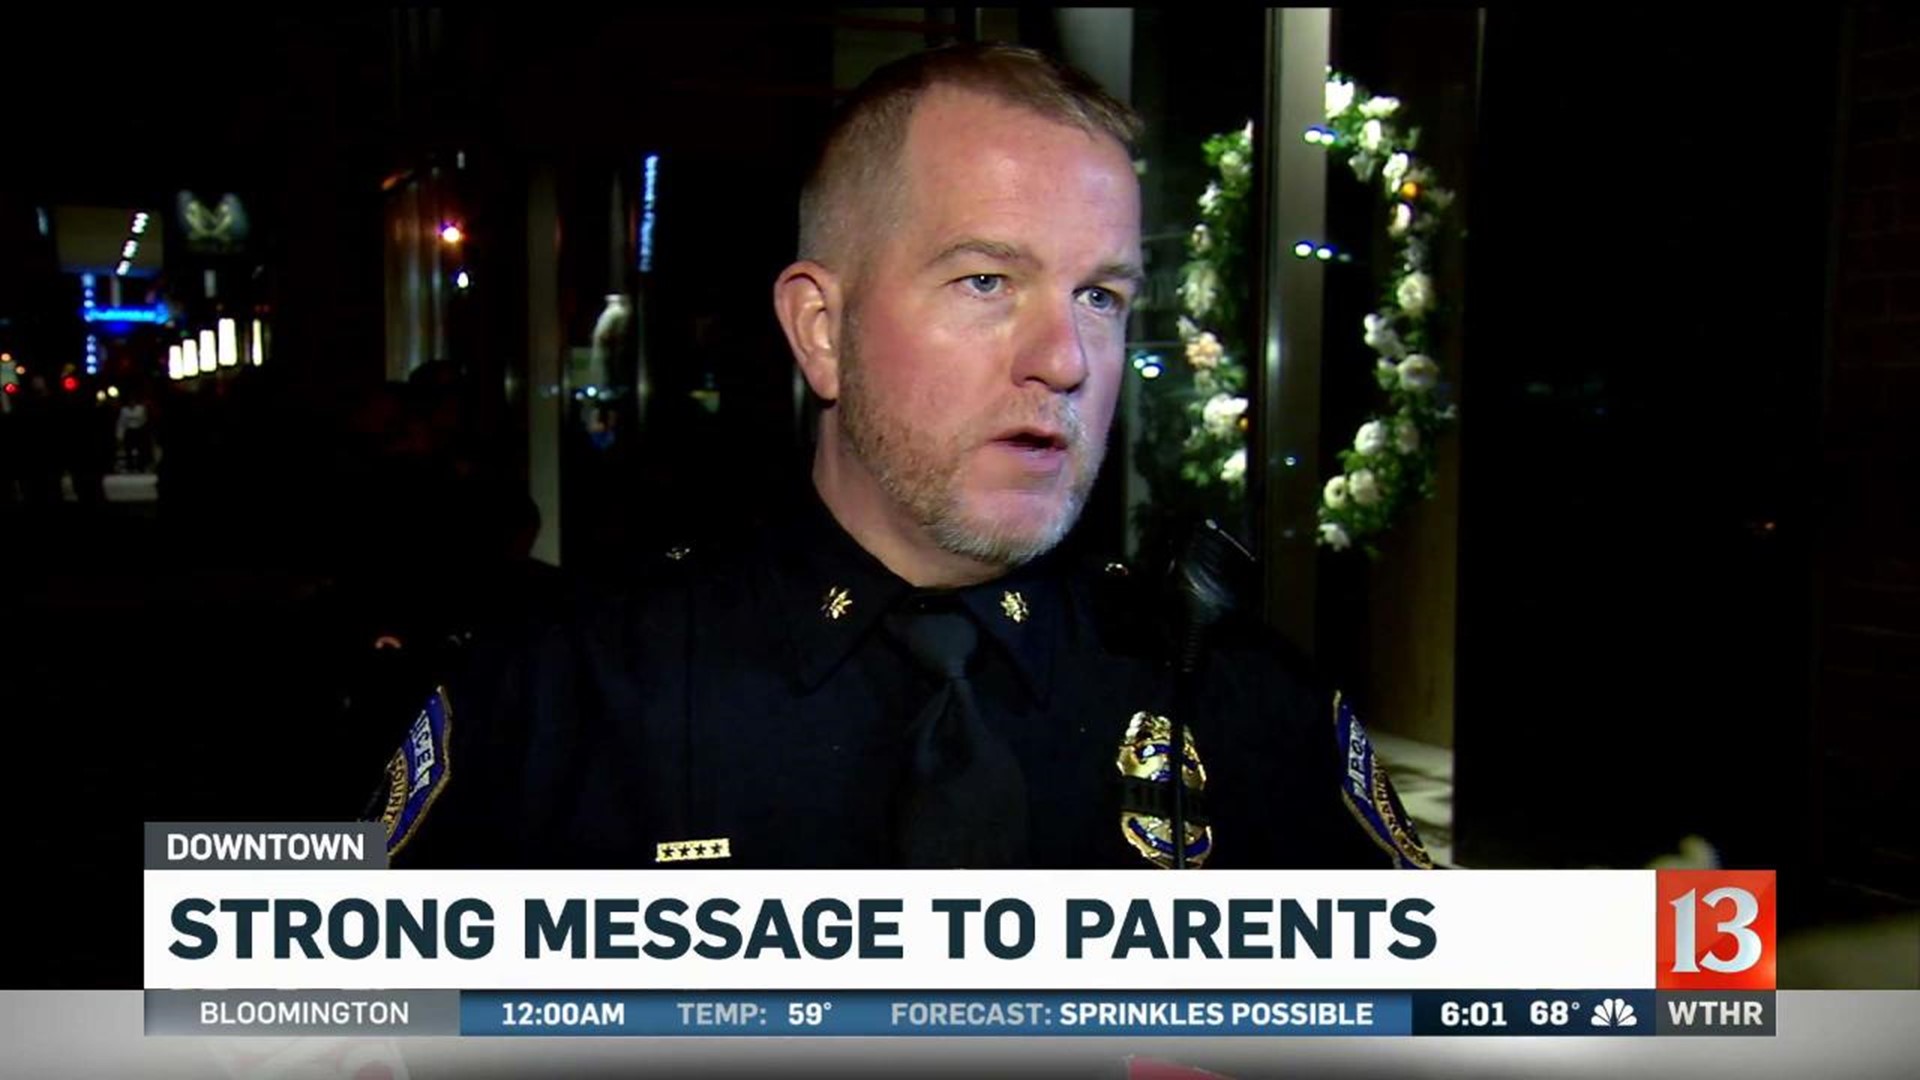 IMPD has strong message to parents after downtown shooting